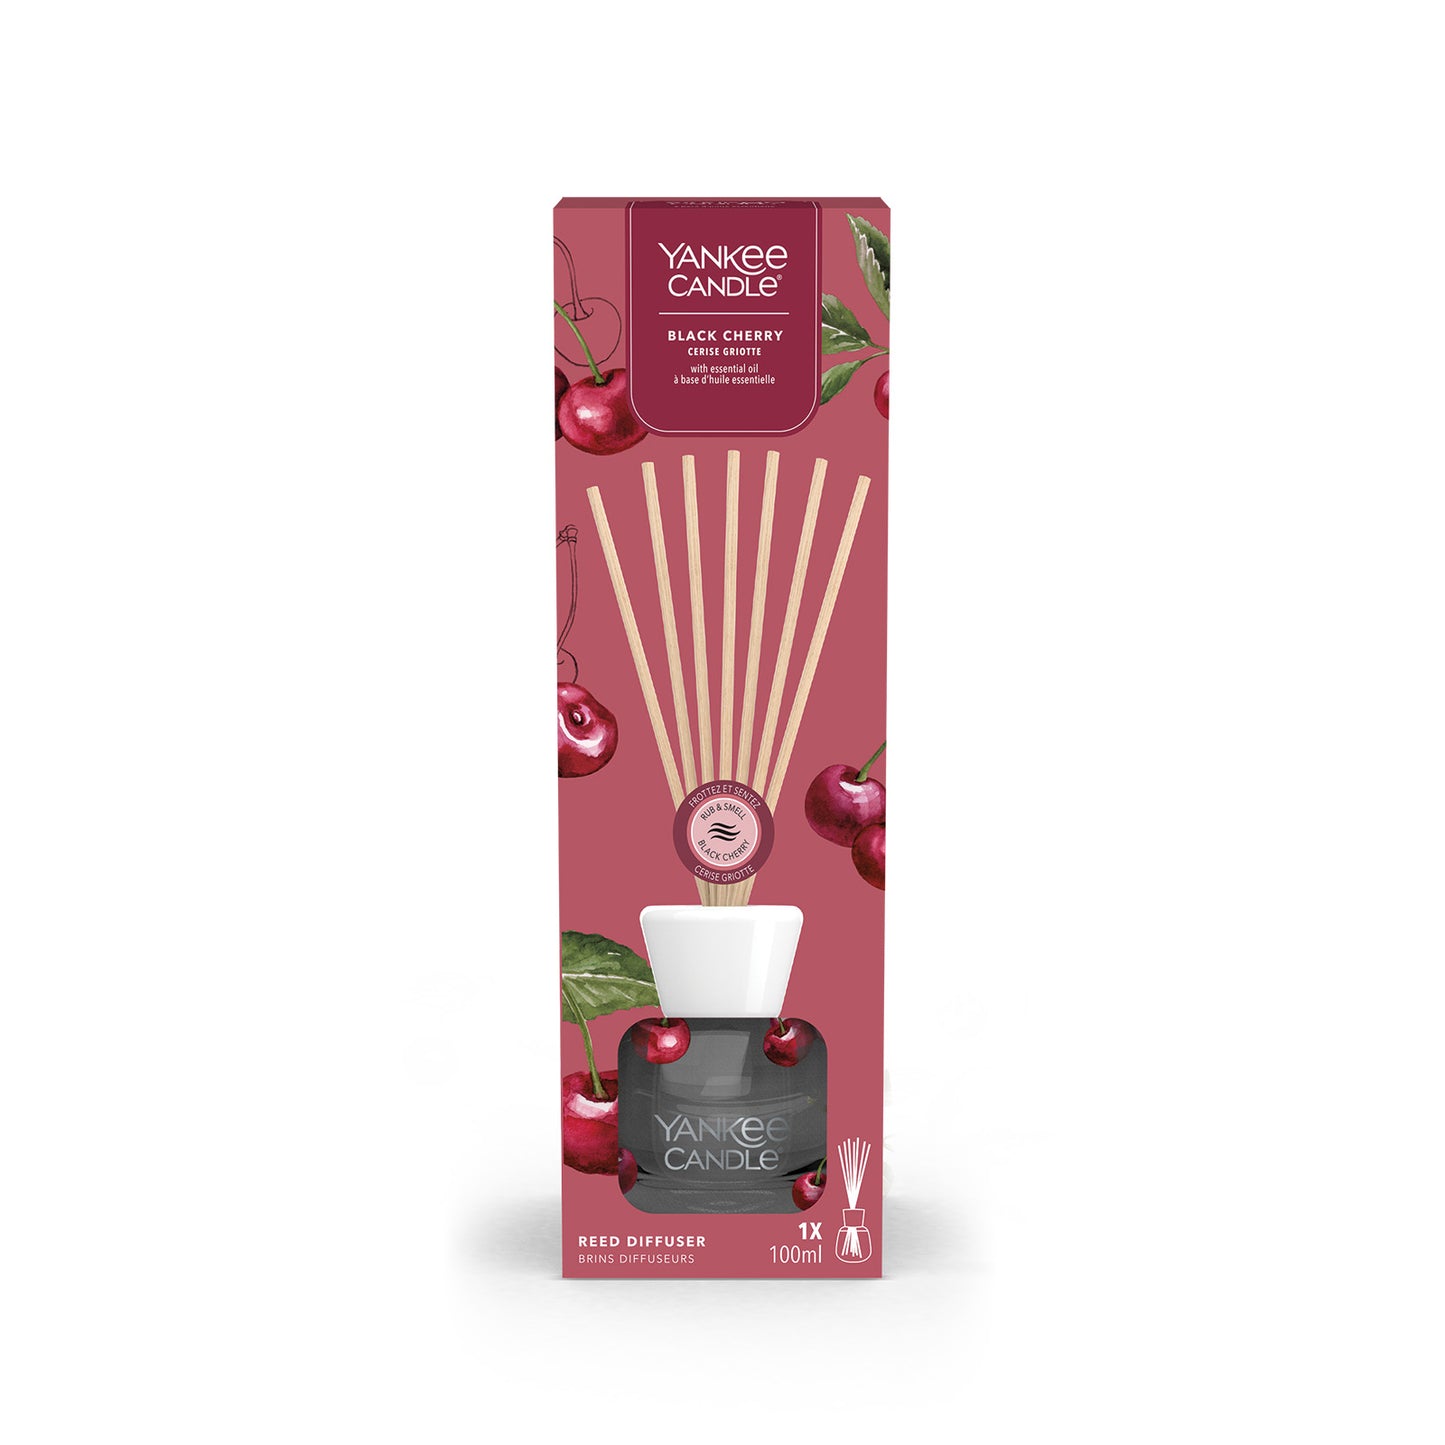 Yankee Candle Black Cherry 100ml Reed Diffuser